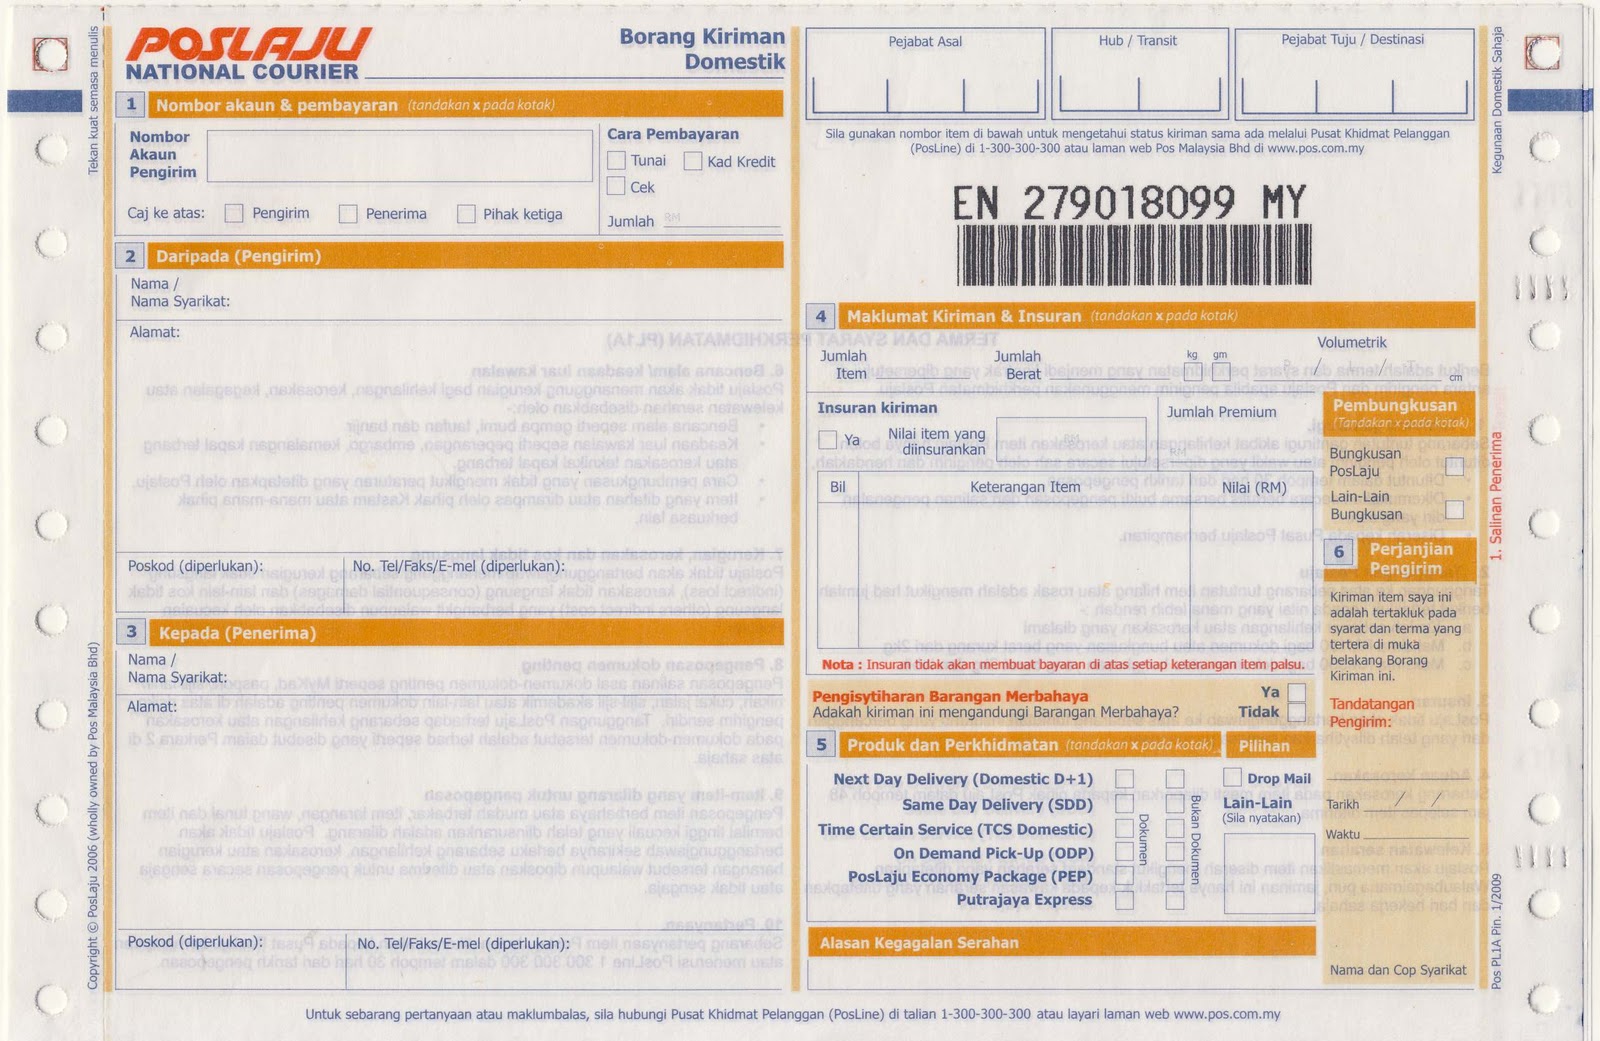 Airmail Labels Collection: Malaysia Poslaju (Domestic Express) - Unable